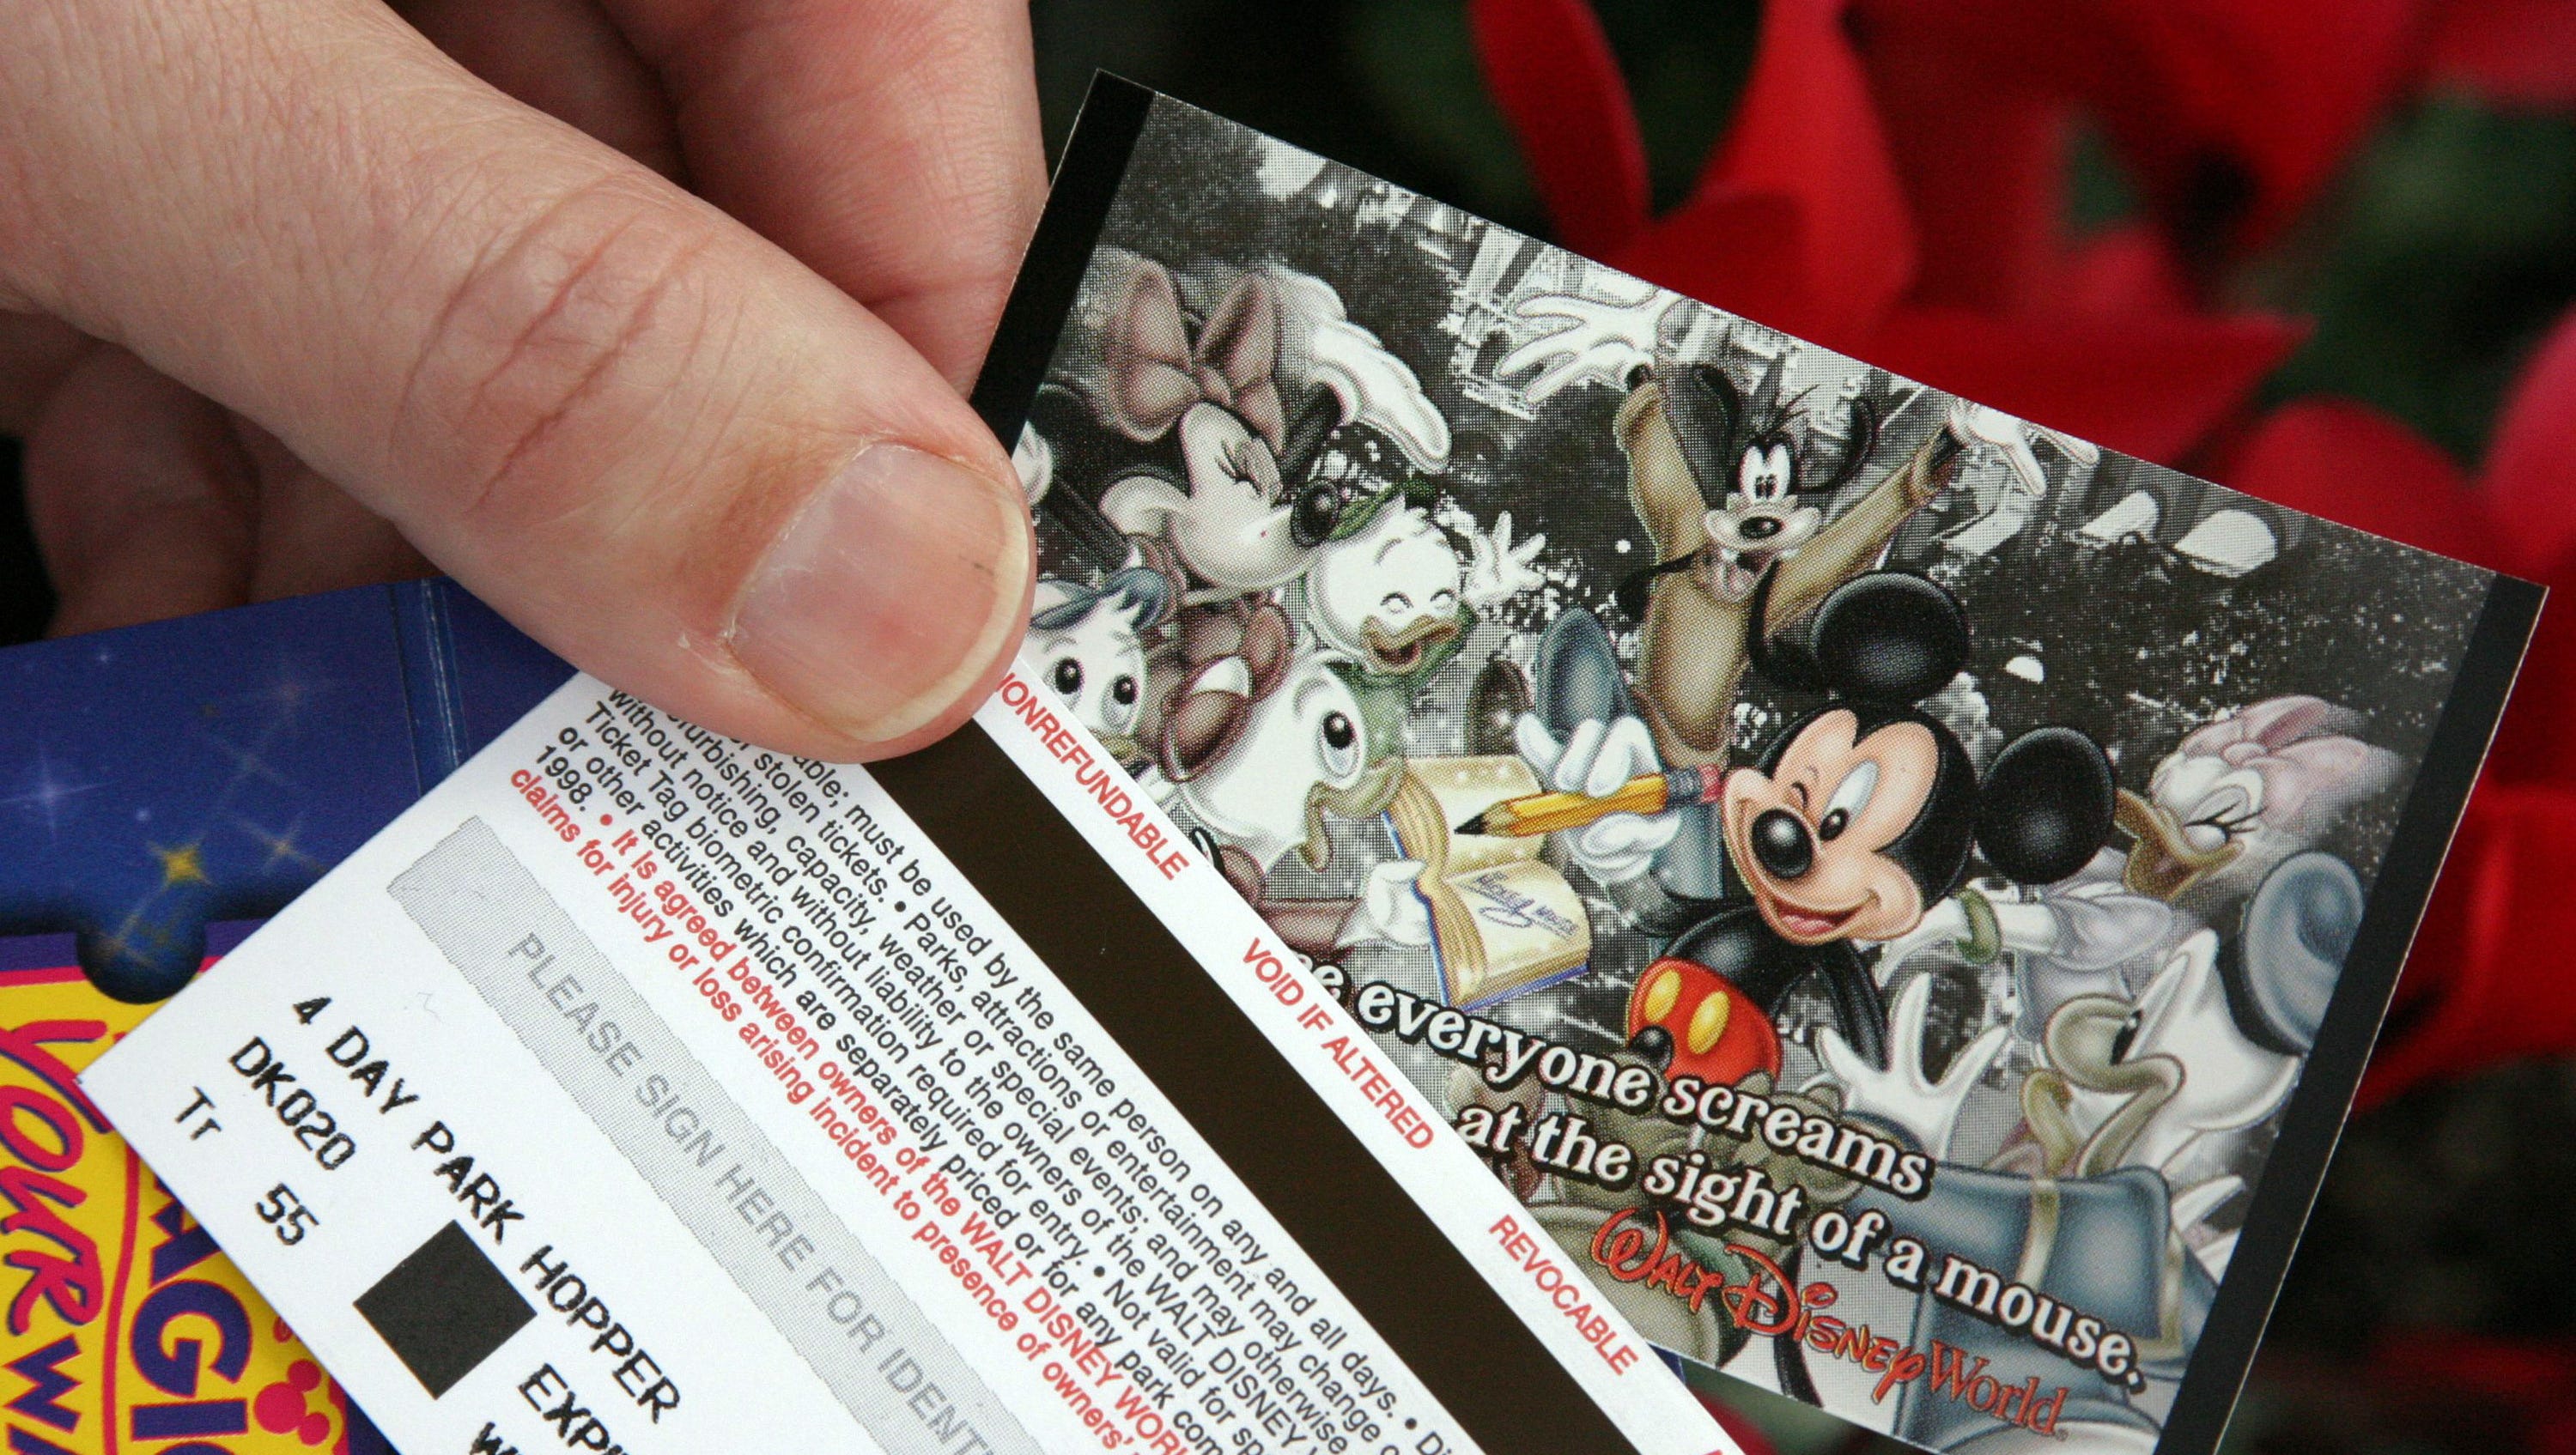 Easy come, easy go: Disney tickets at UCF